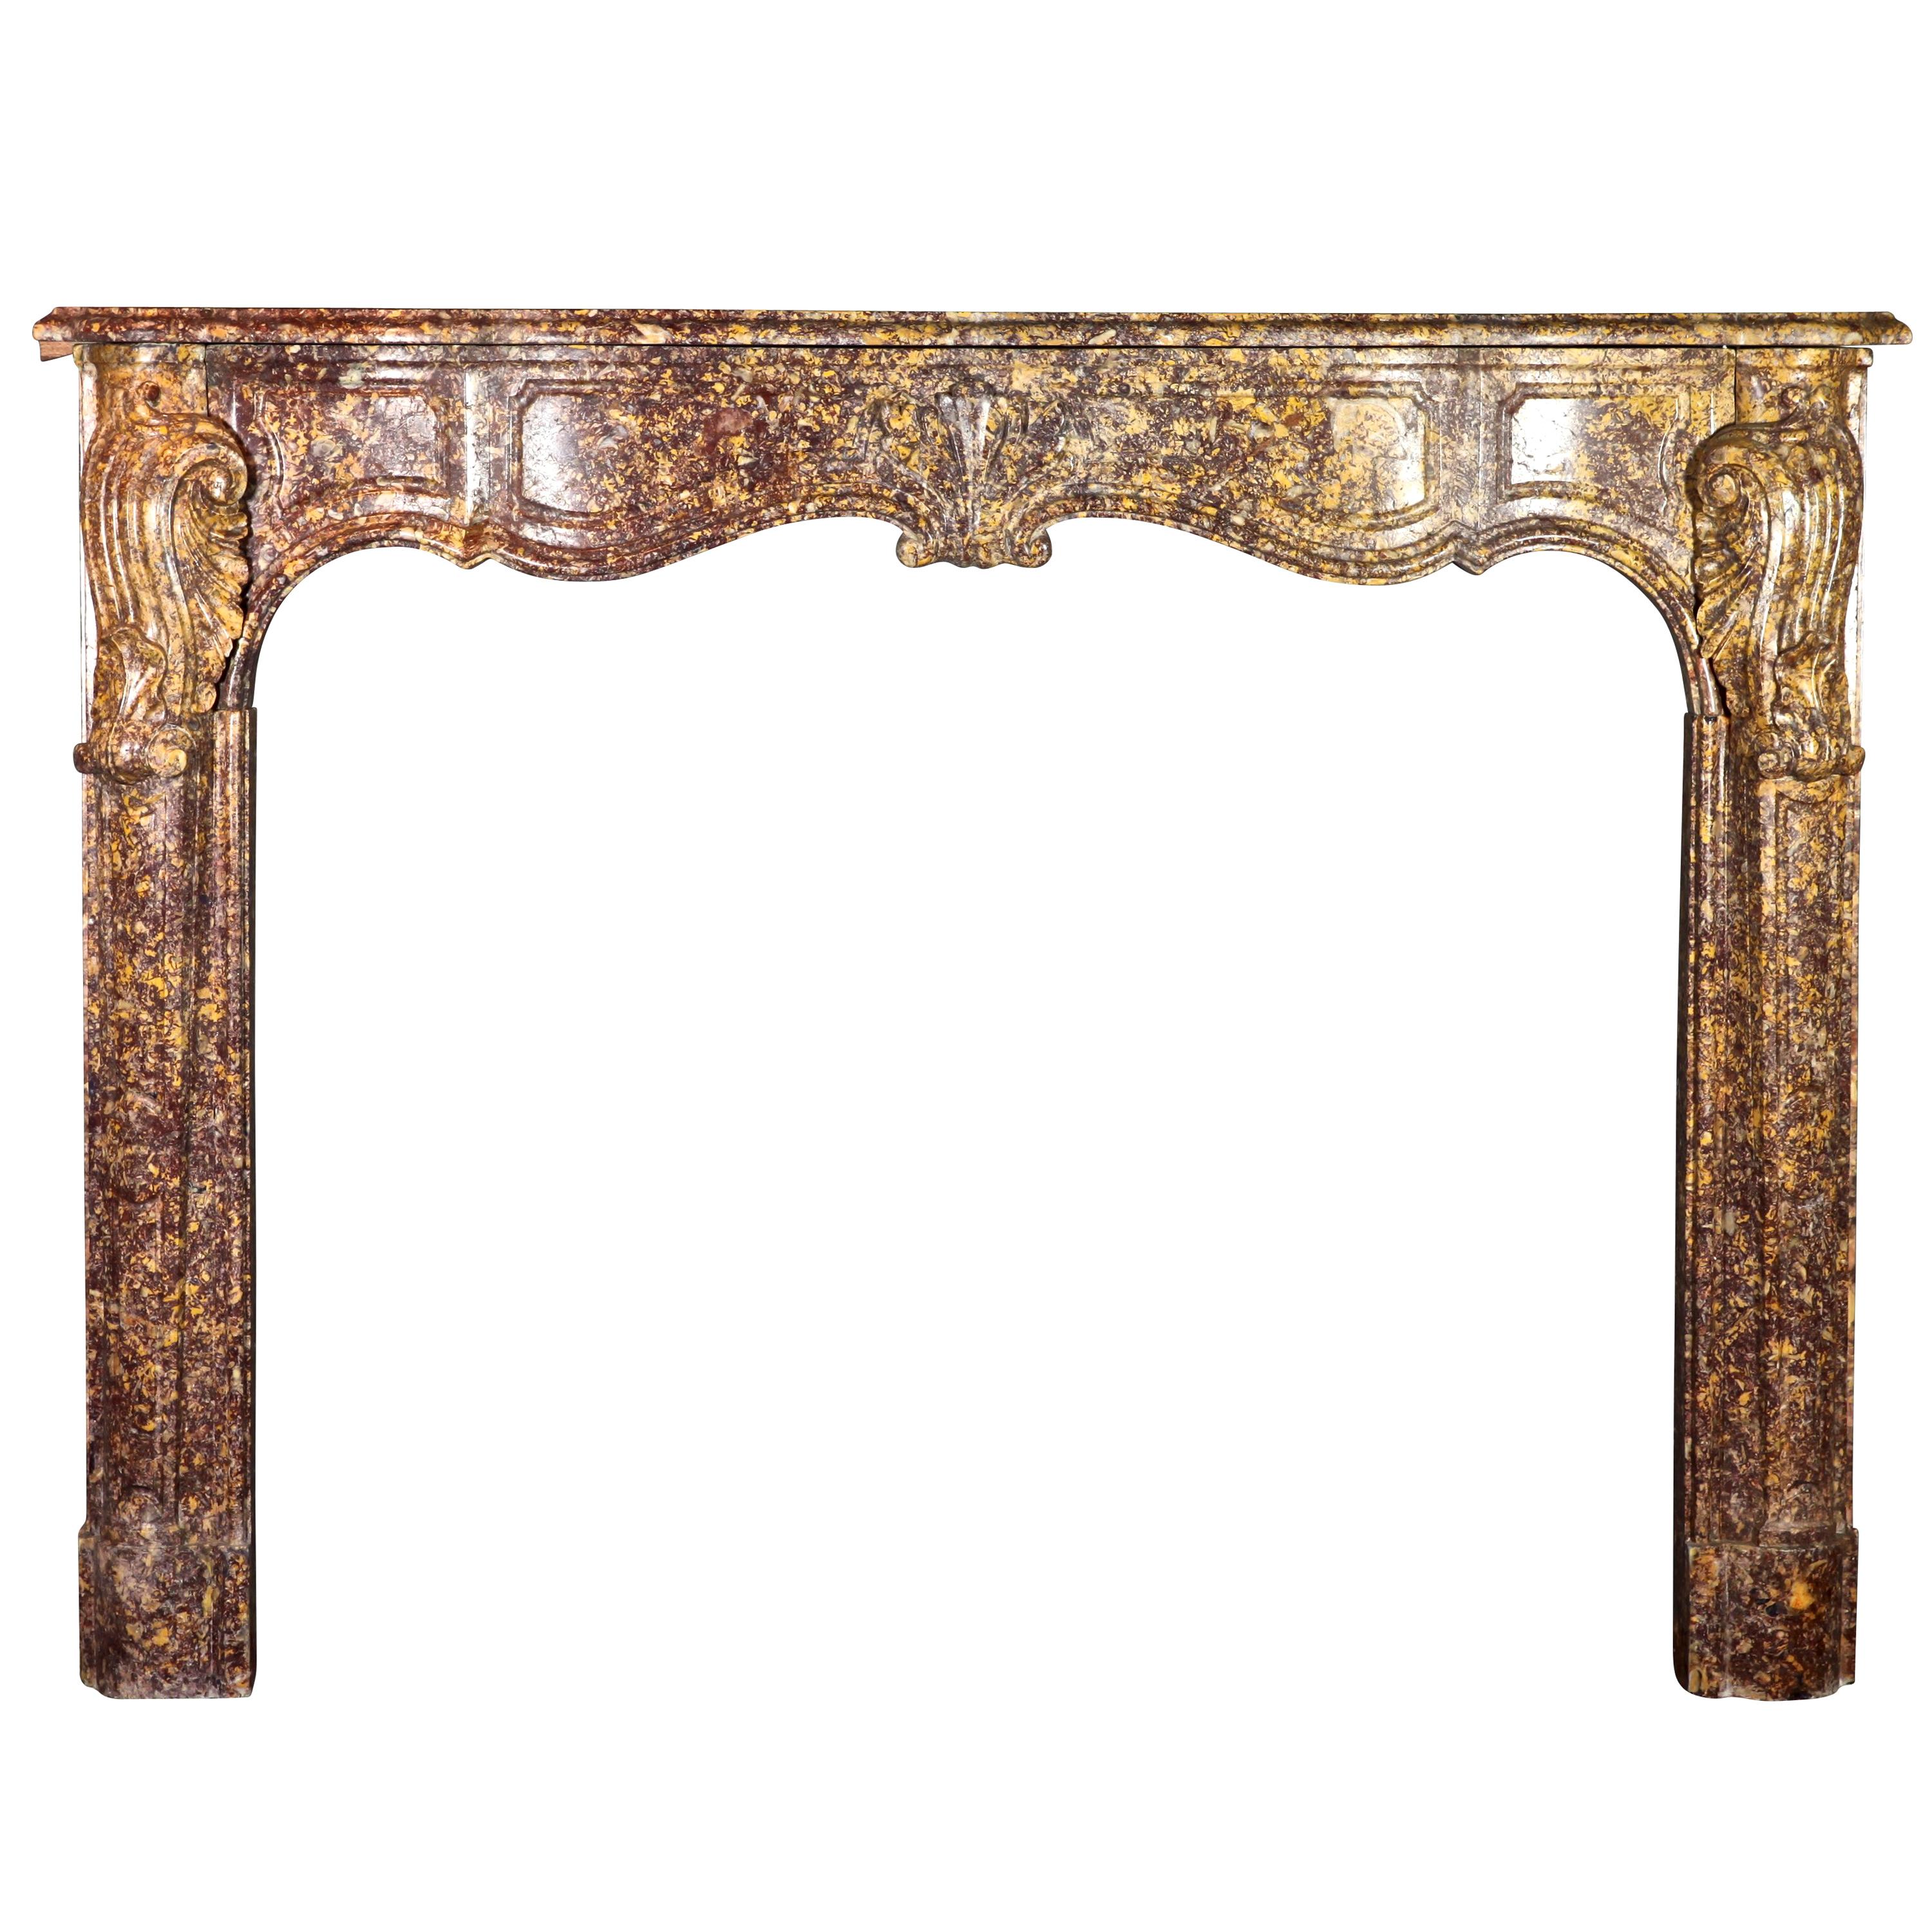 Fine Regency Period Antique Fireplace Surround in Royal Marble